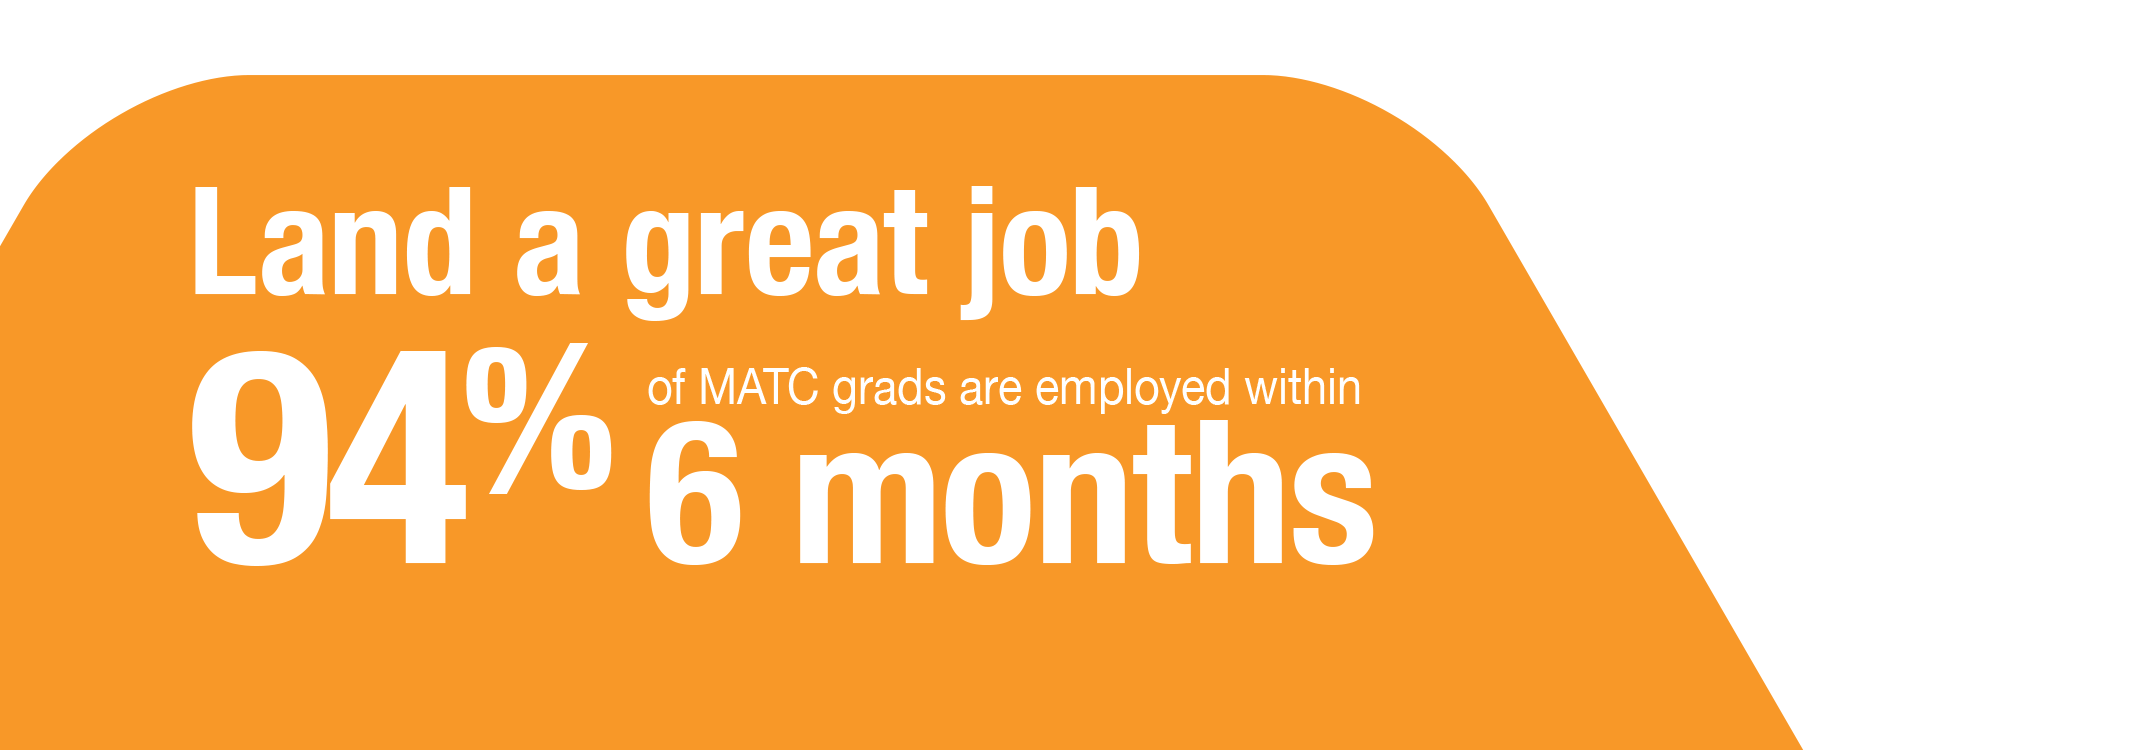 94% of MATC grads are employed within 6 months